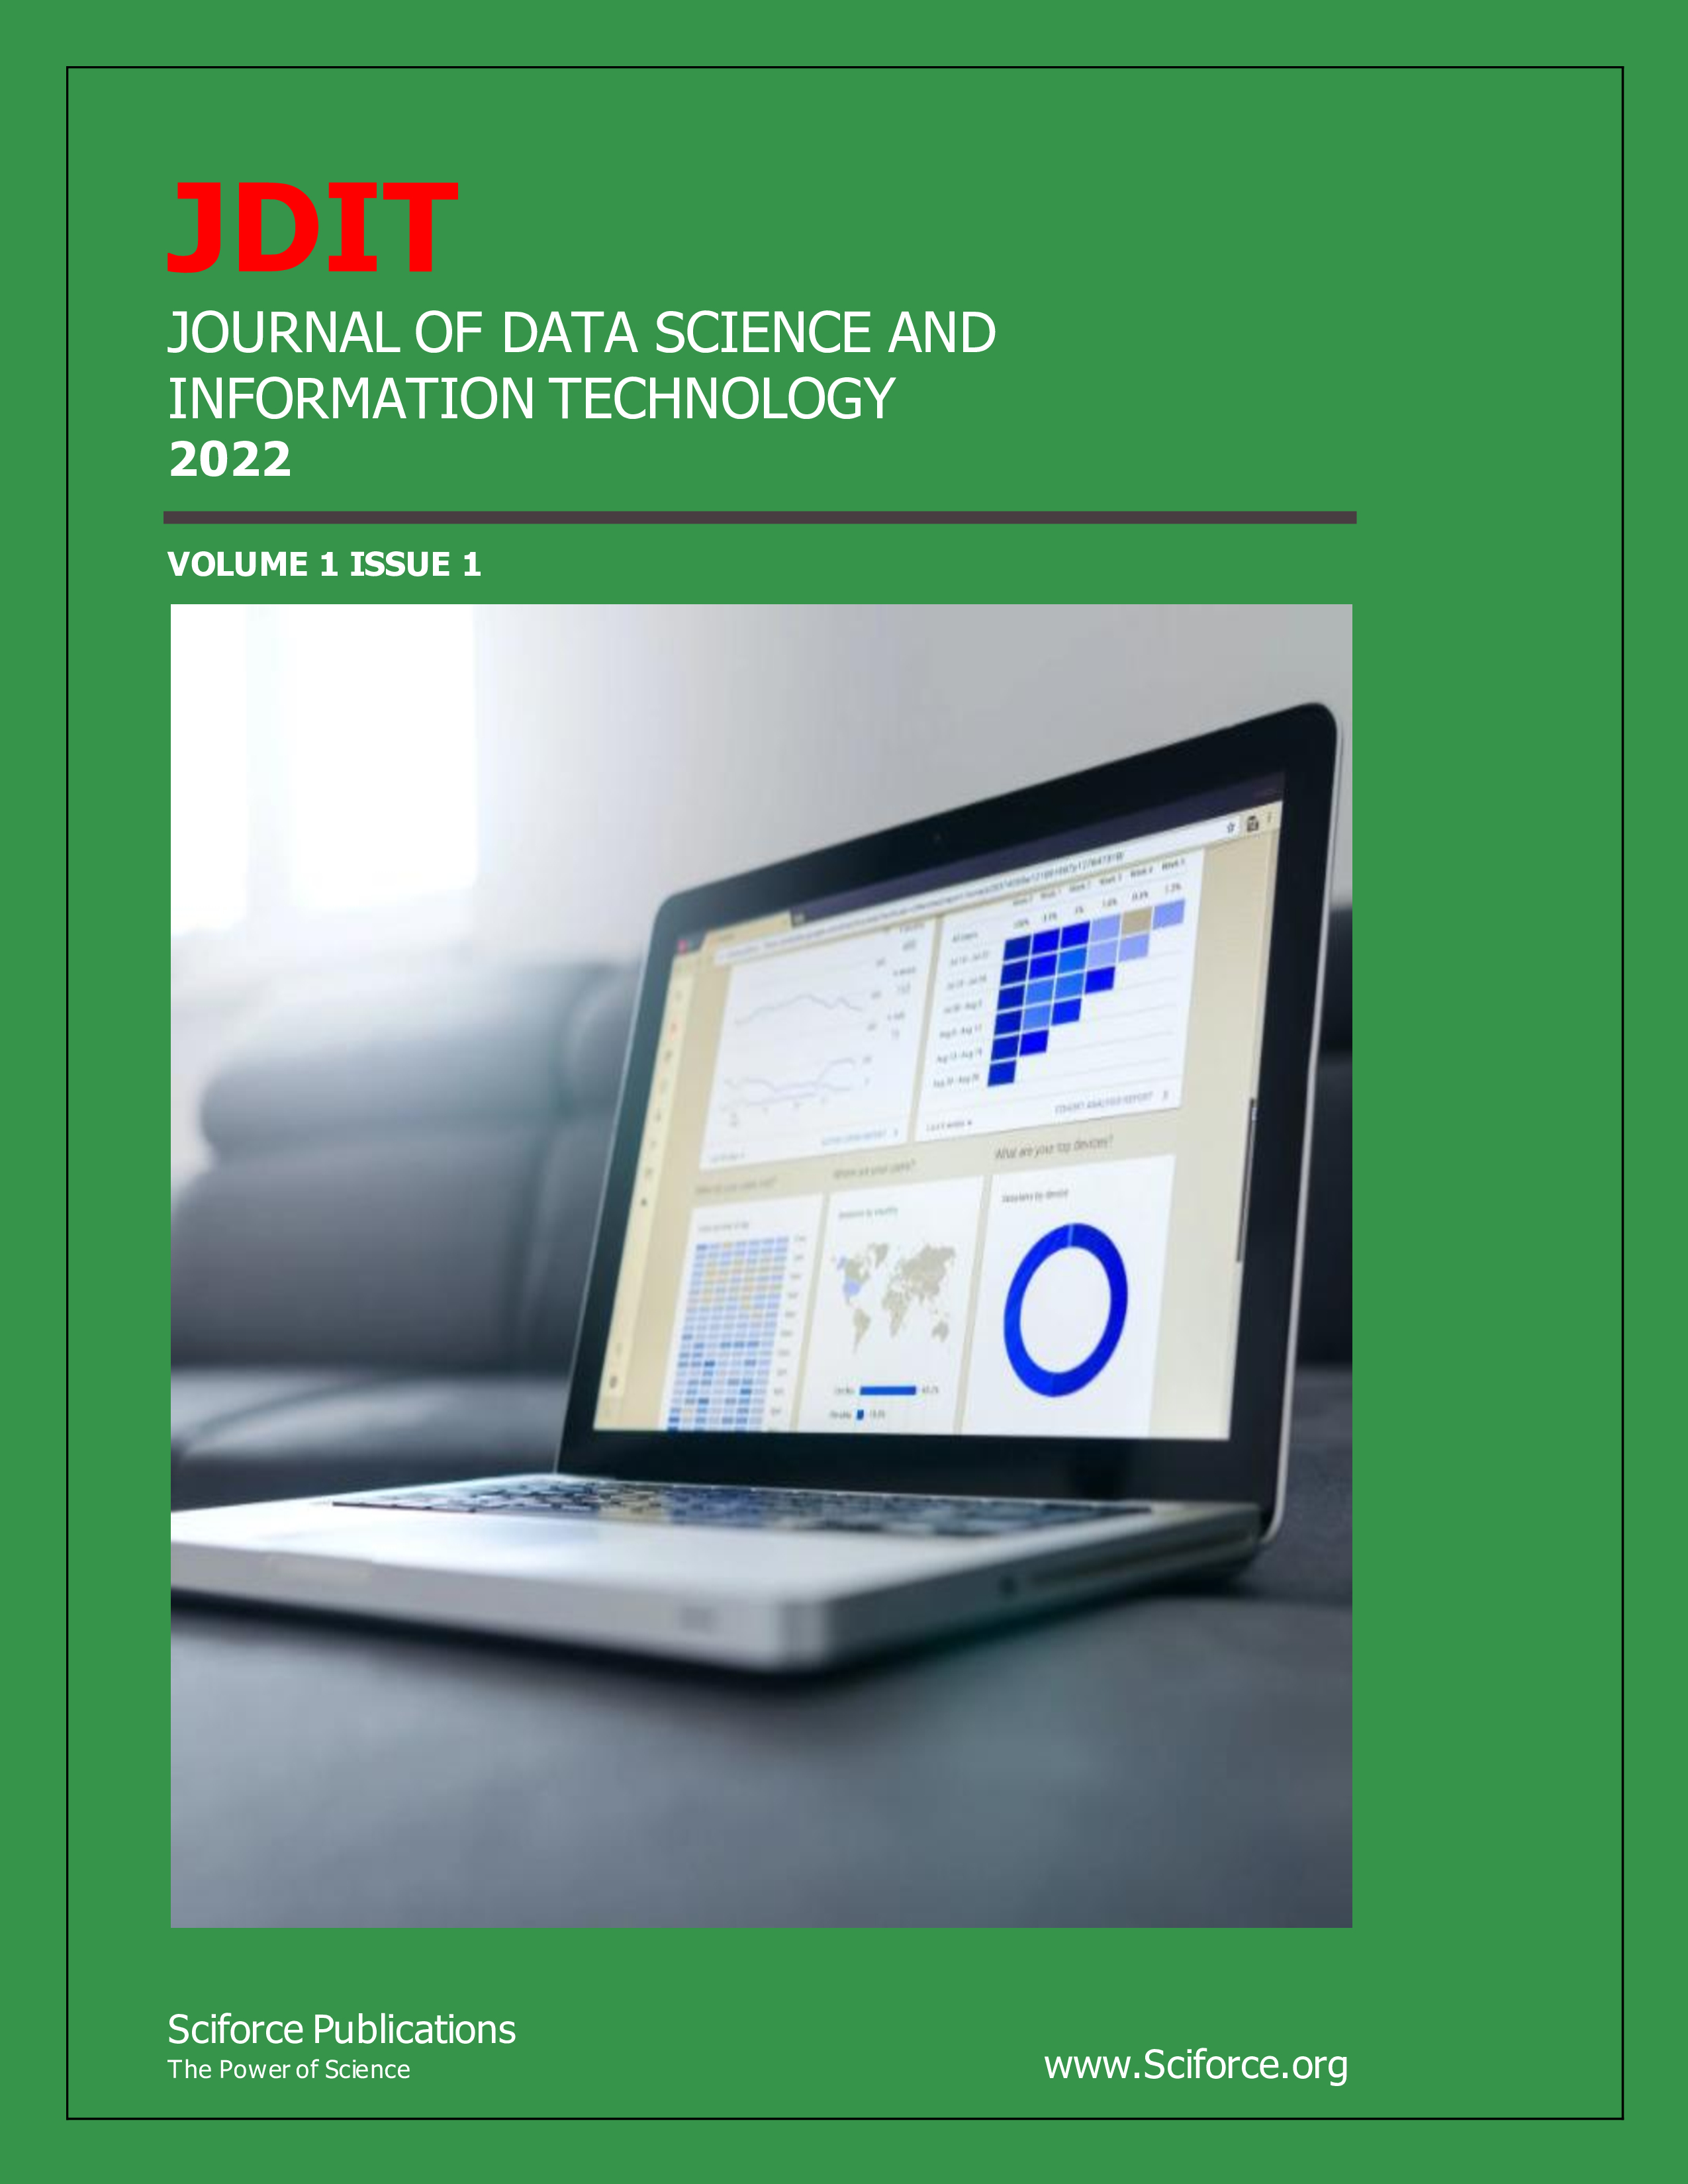 Journal of Data Science and Information Technology